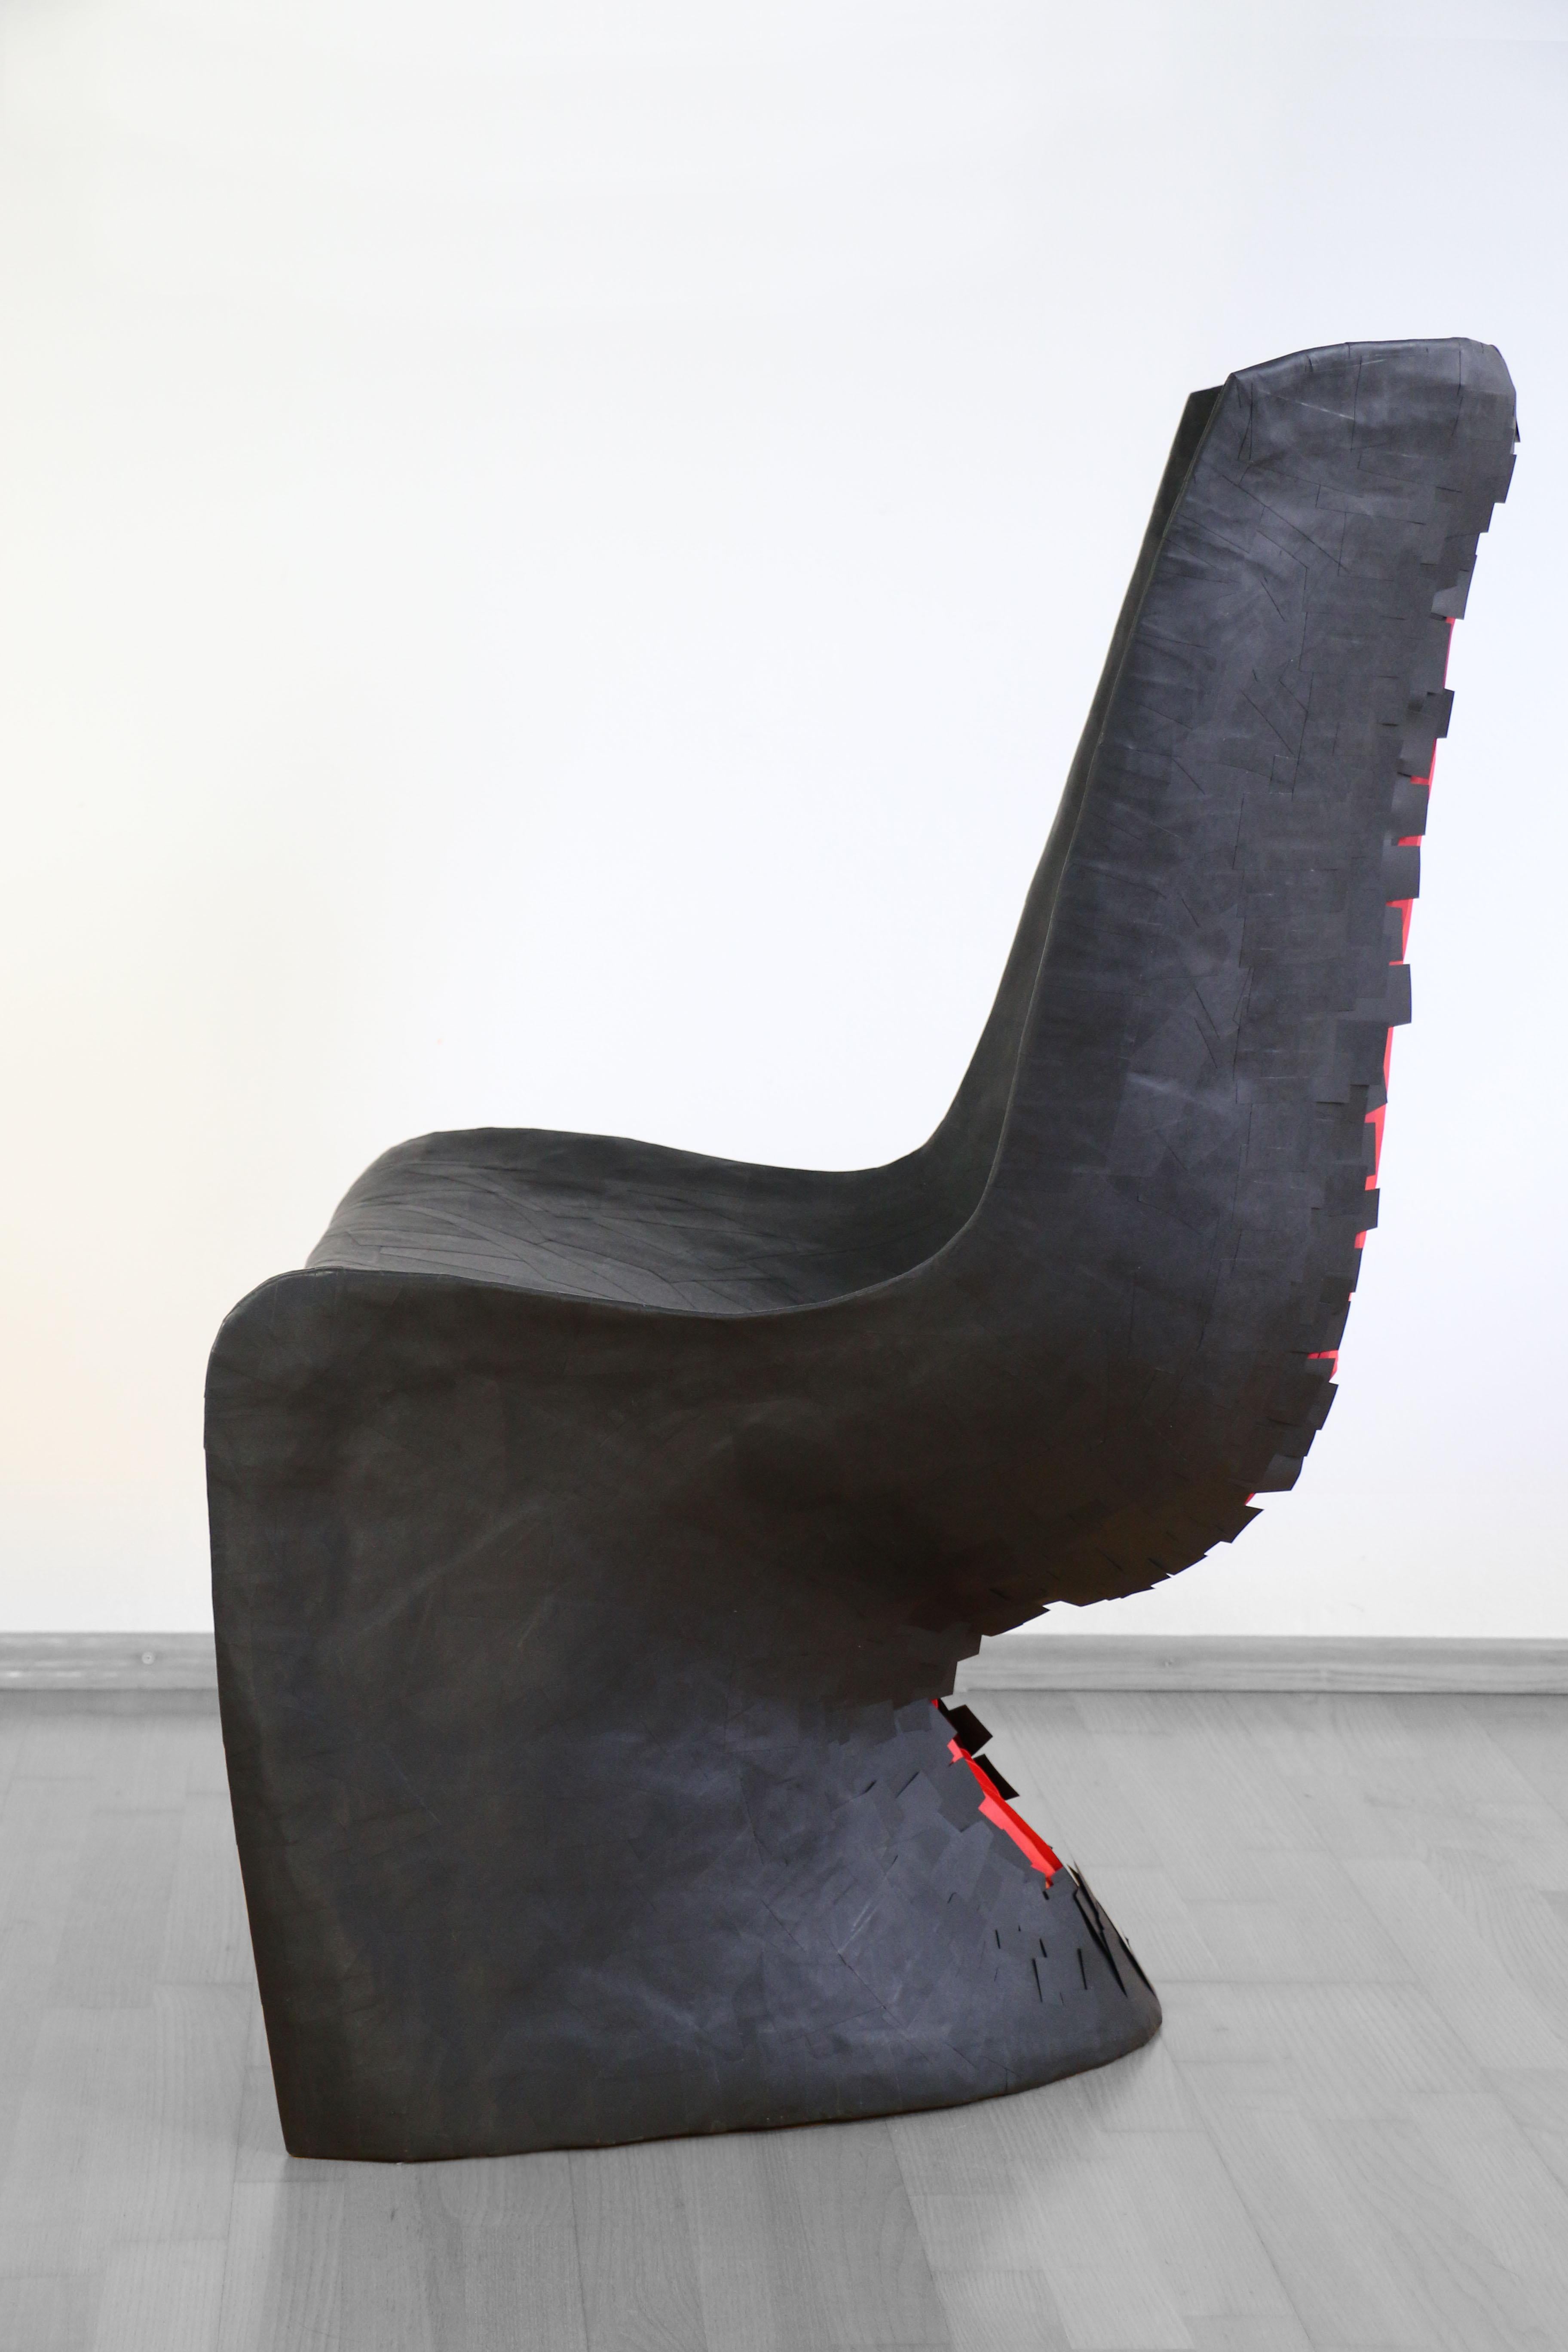 Collectible Design Unique Black Paper Chair Black Lotus by Vadim Kibardin In New Condition For Sale In Amsterdam, NL